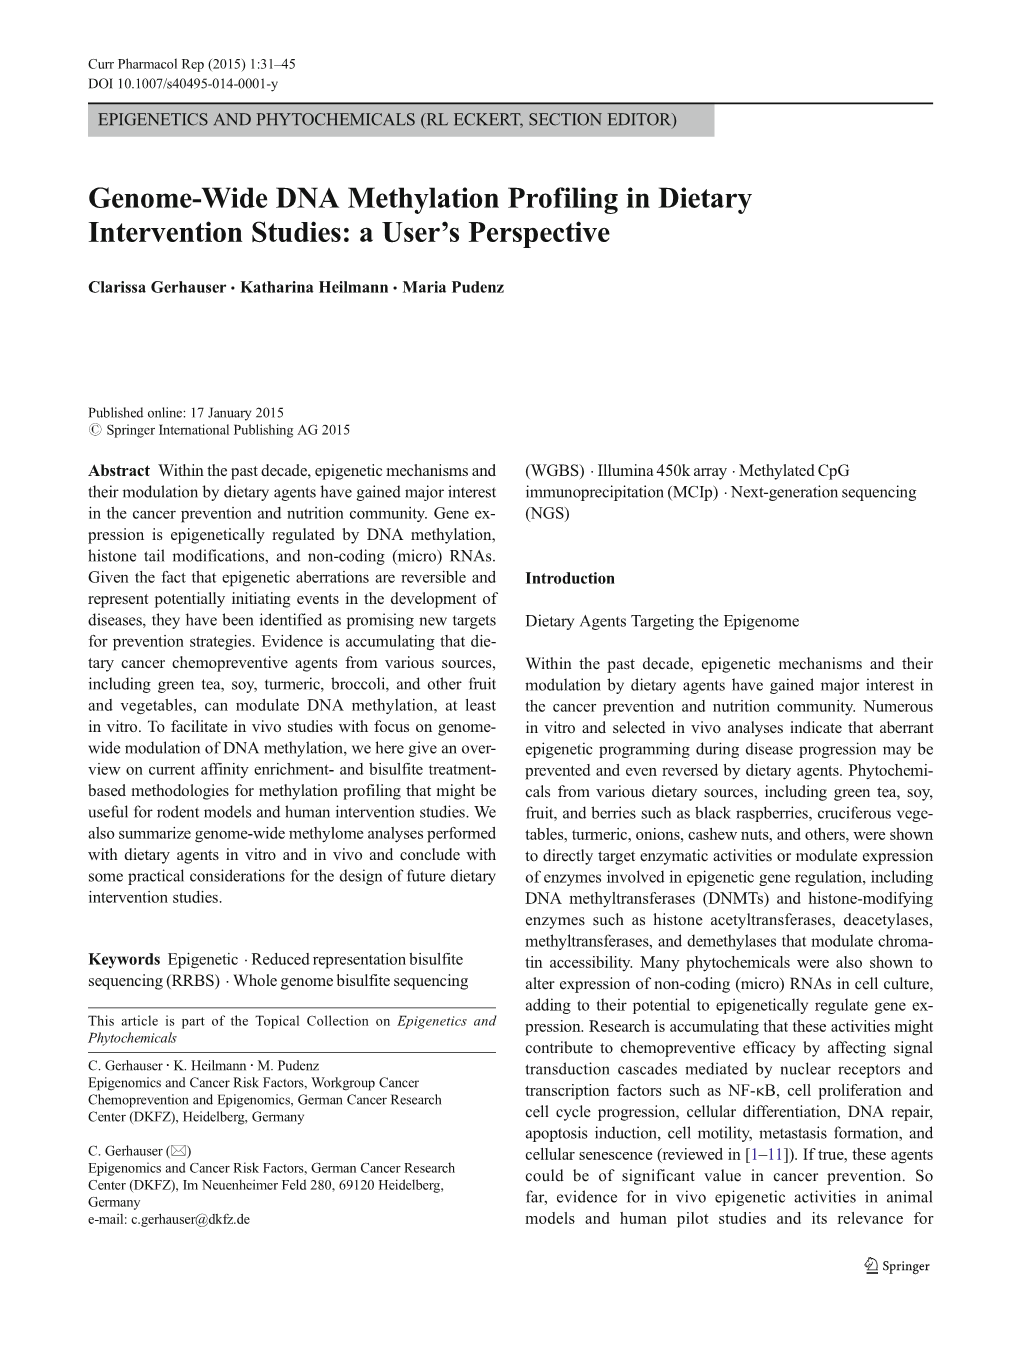 Genome-Wide DNA Methylation Profiling in Dietary Intervention Studies: a User’Sperspective